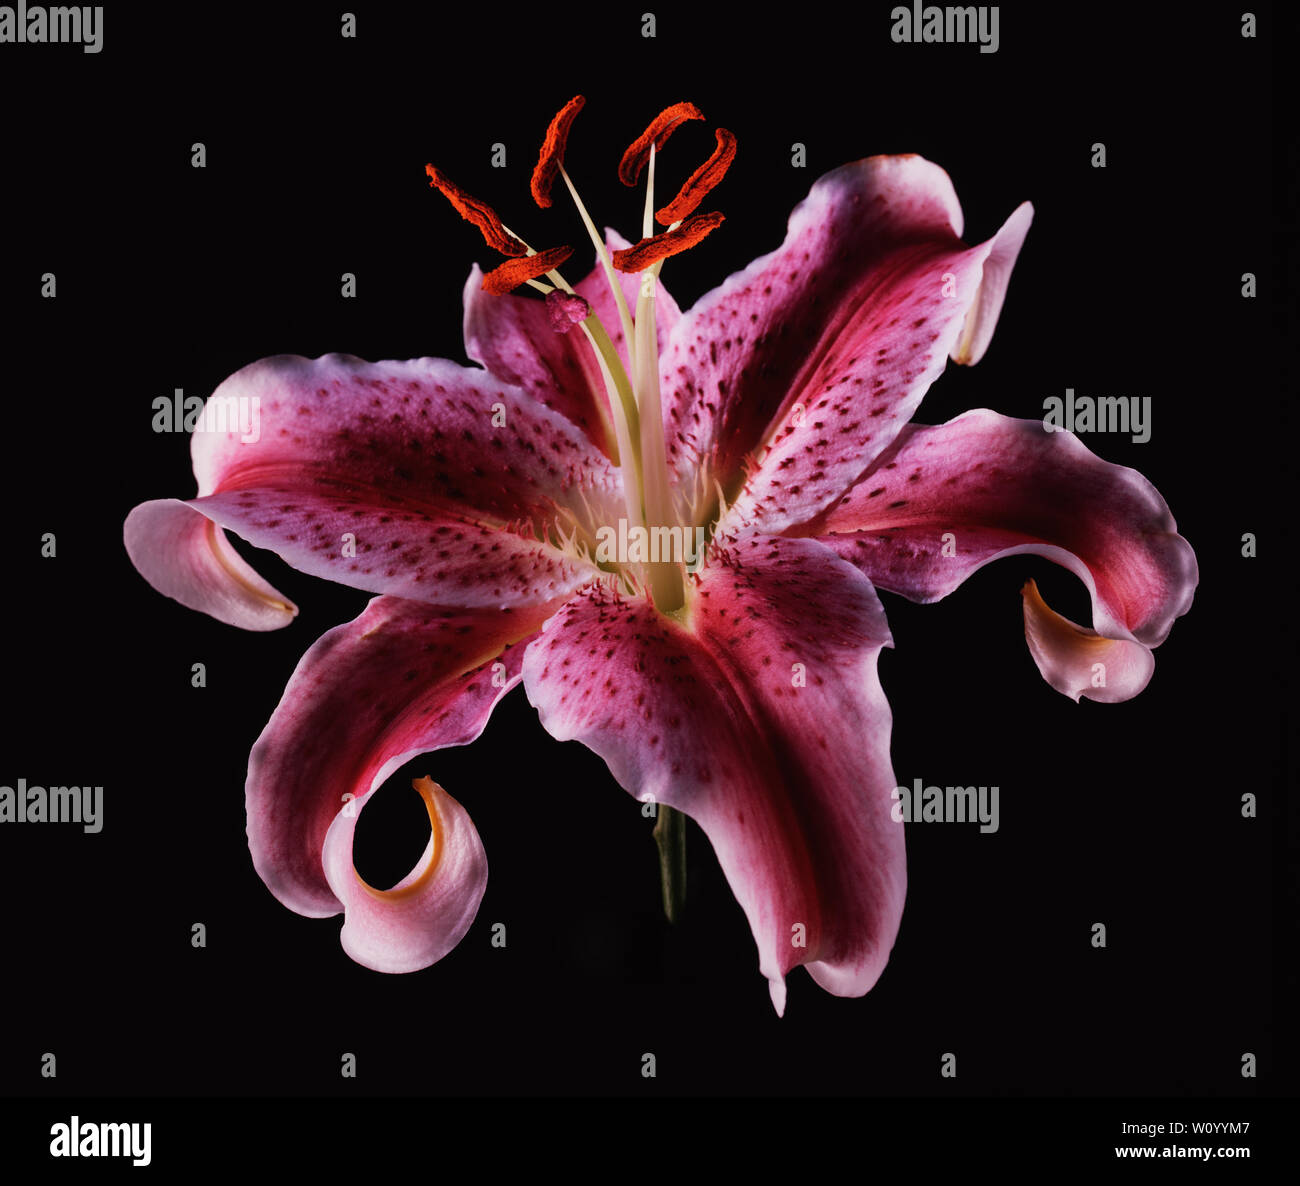 A close-up of a lilly blossom, from a light paonted series of florals in studio. Stock Photo